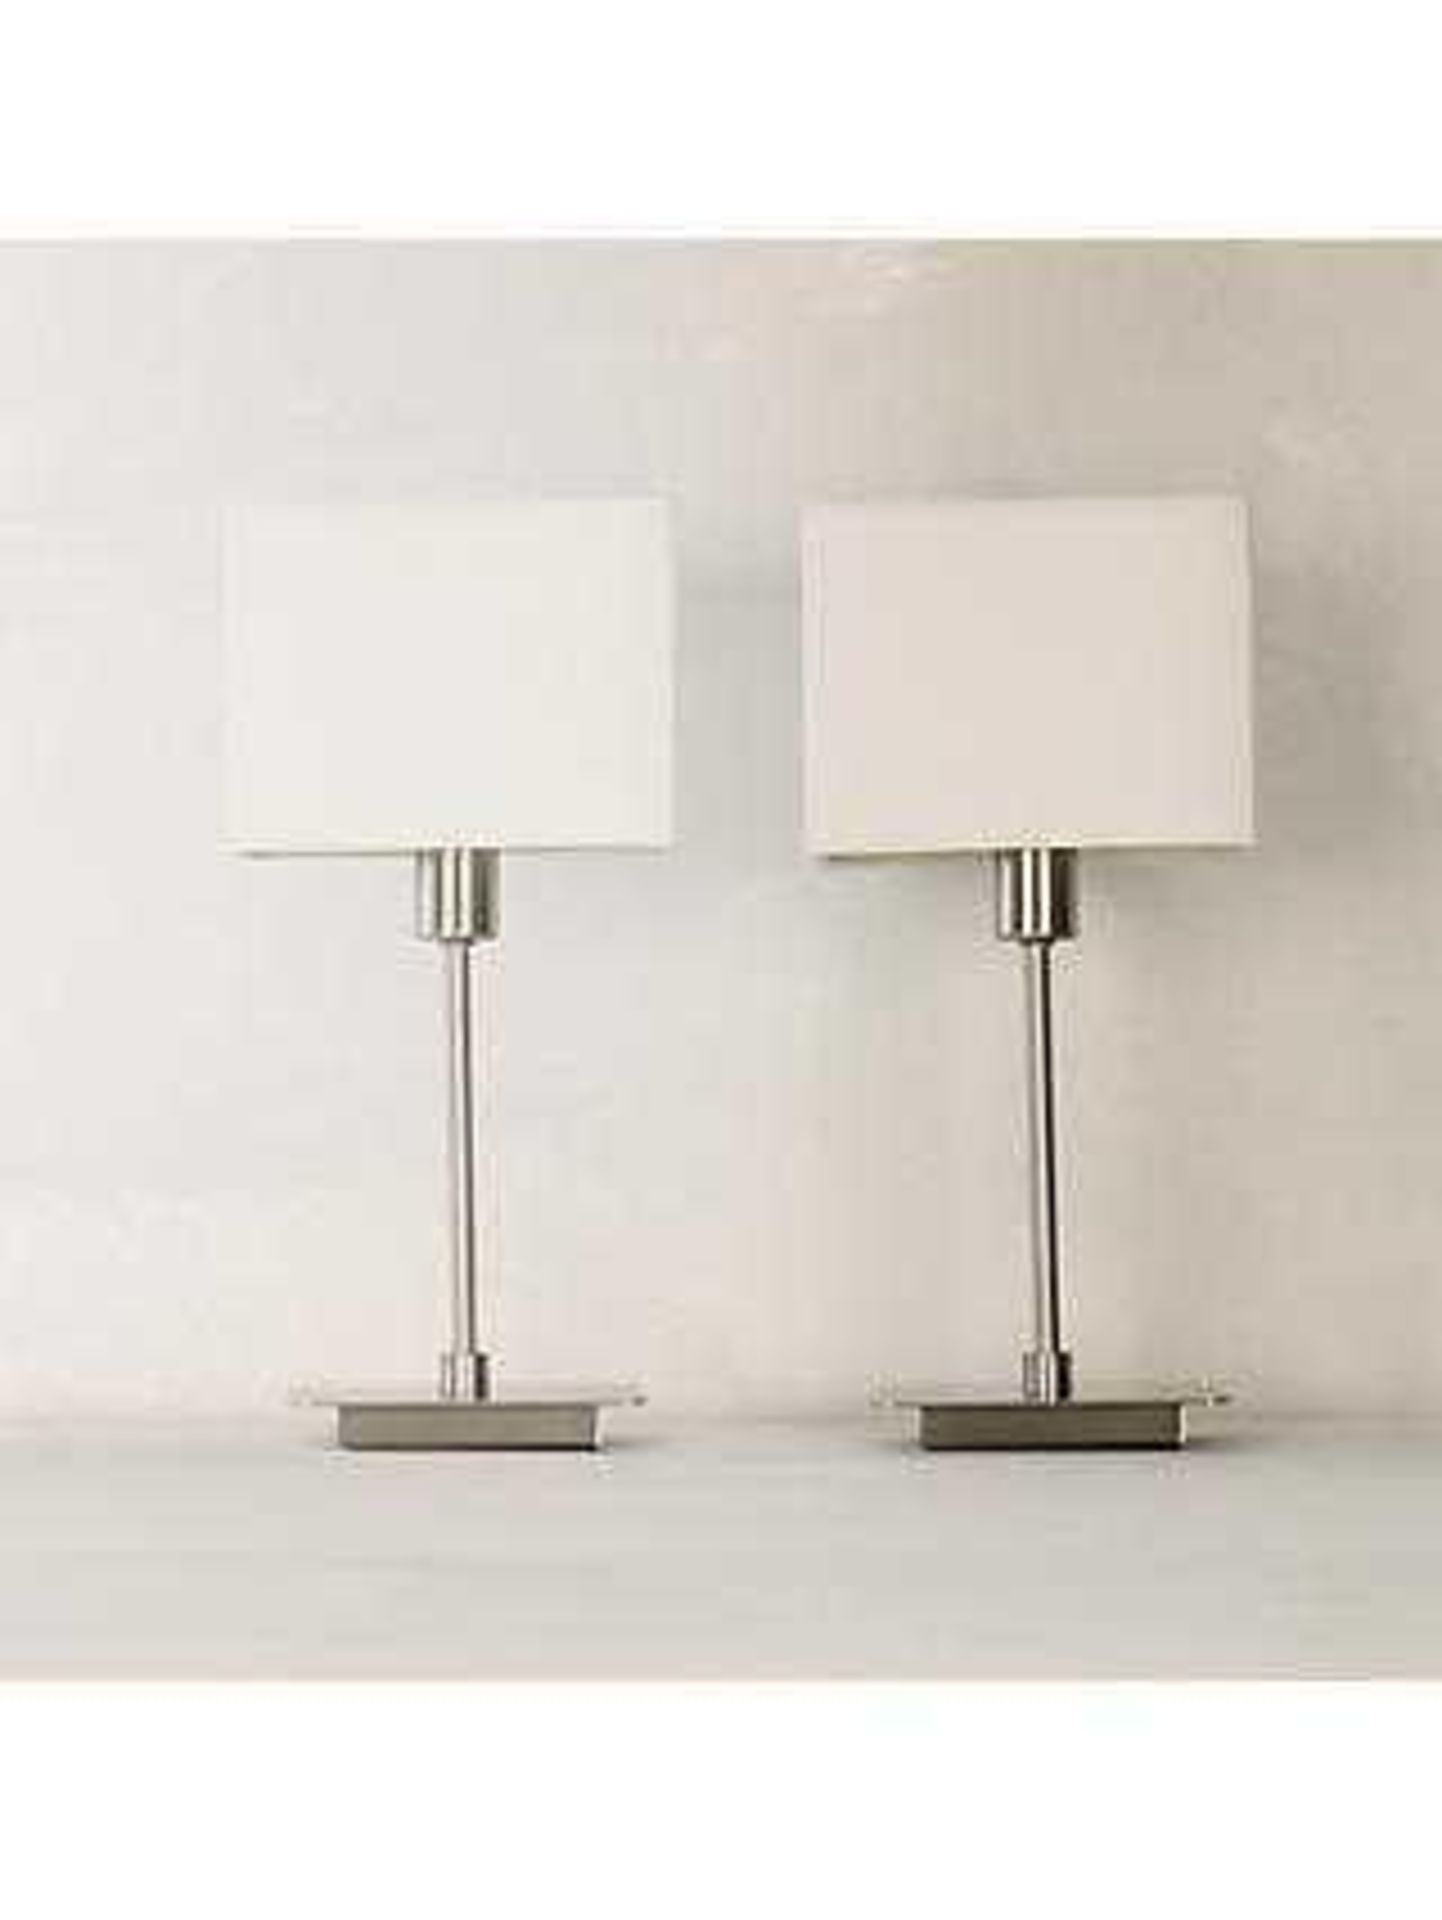 Rrp £30 To £35 Each Boxed Assorted John Lewis And Partners Lights To Include Ruby Table Lamps Set Of - Image 3 of 3